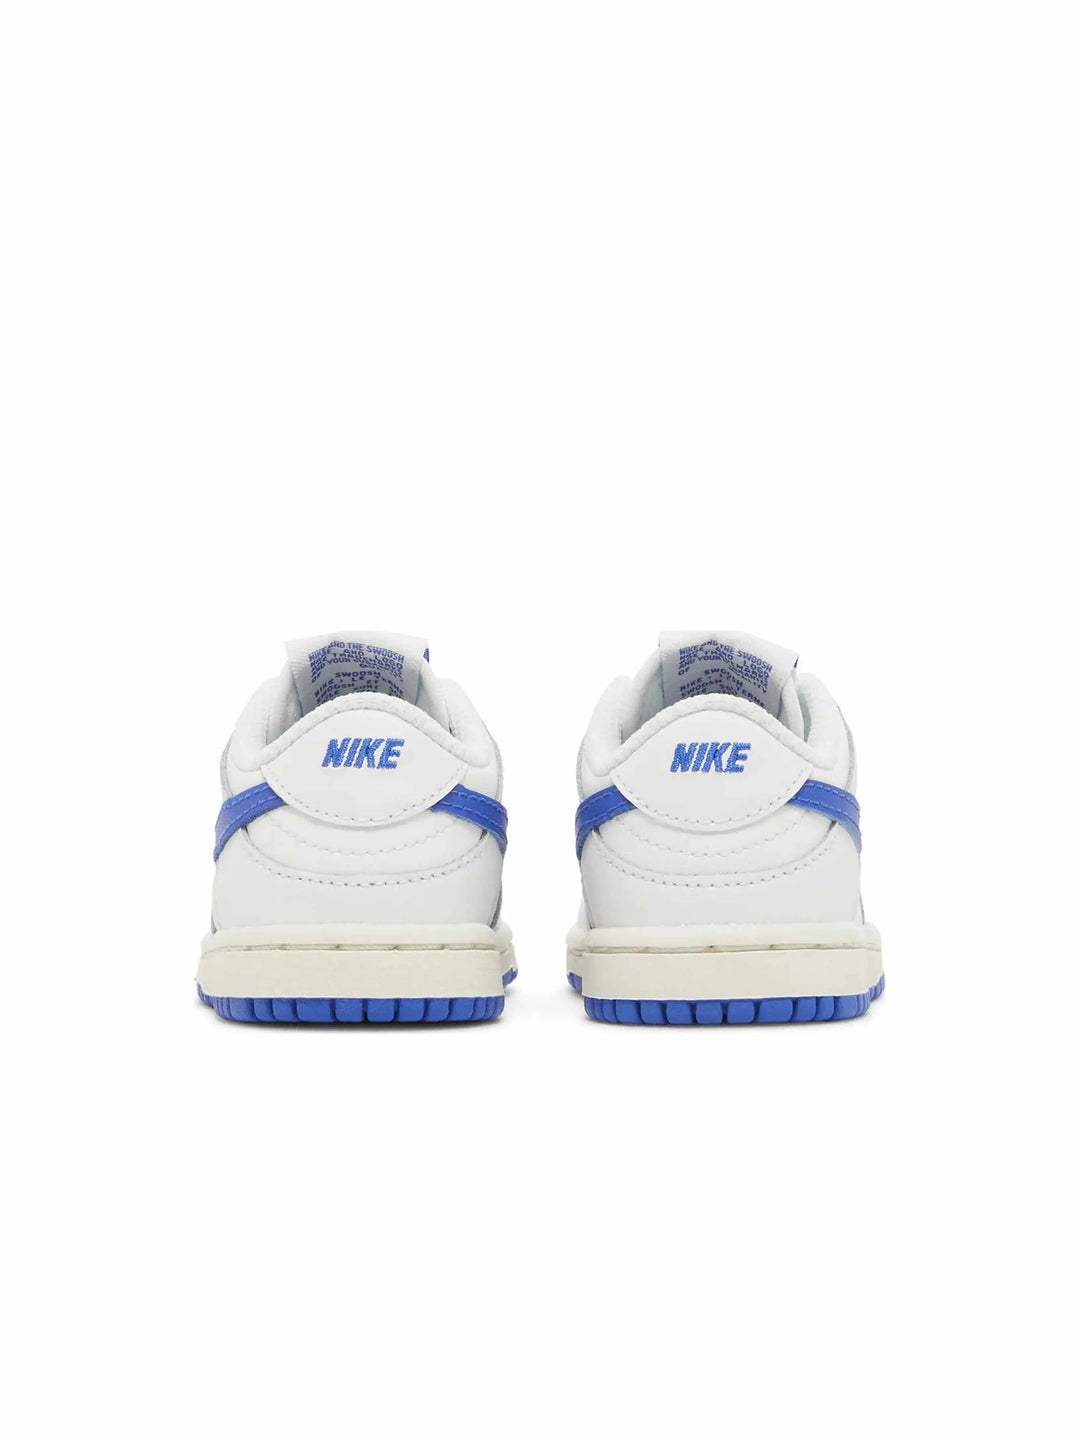 Nike Dunk Low Summit White Hyper Royal (TD) in Auckland, New Zealand - Shop name